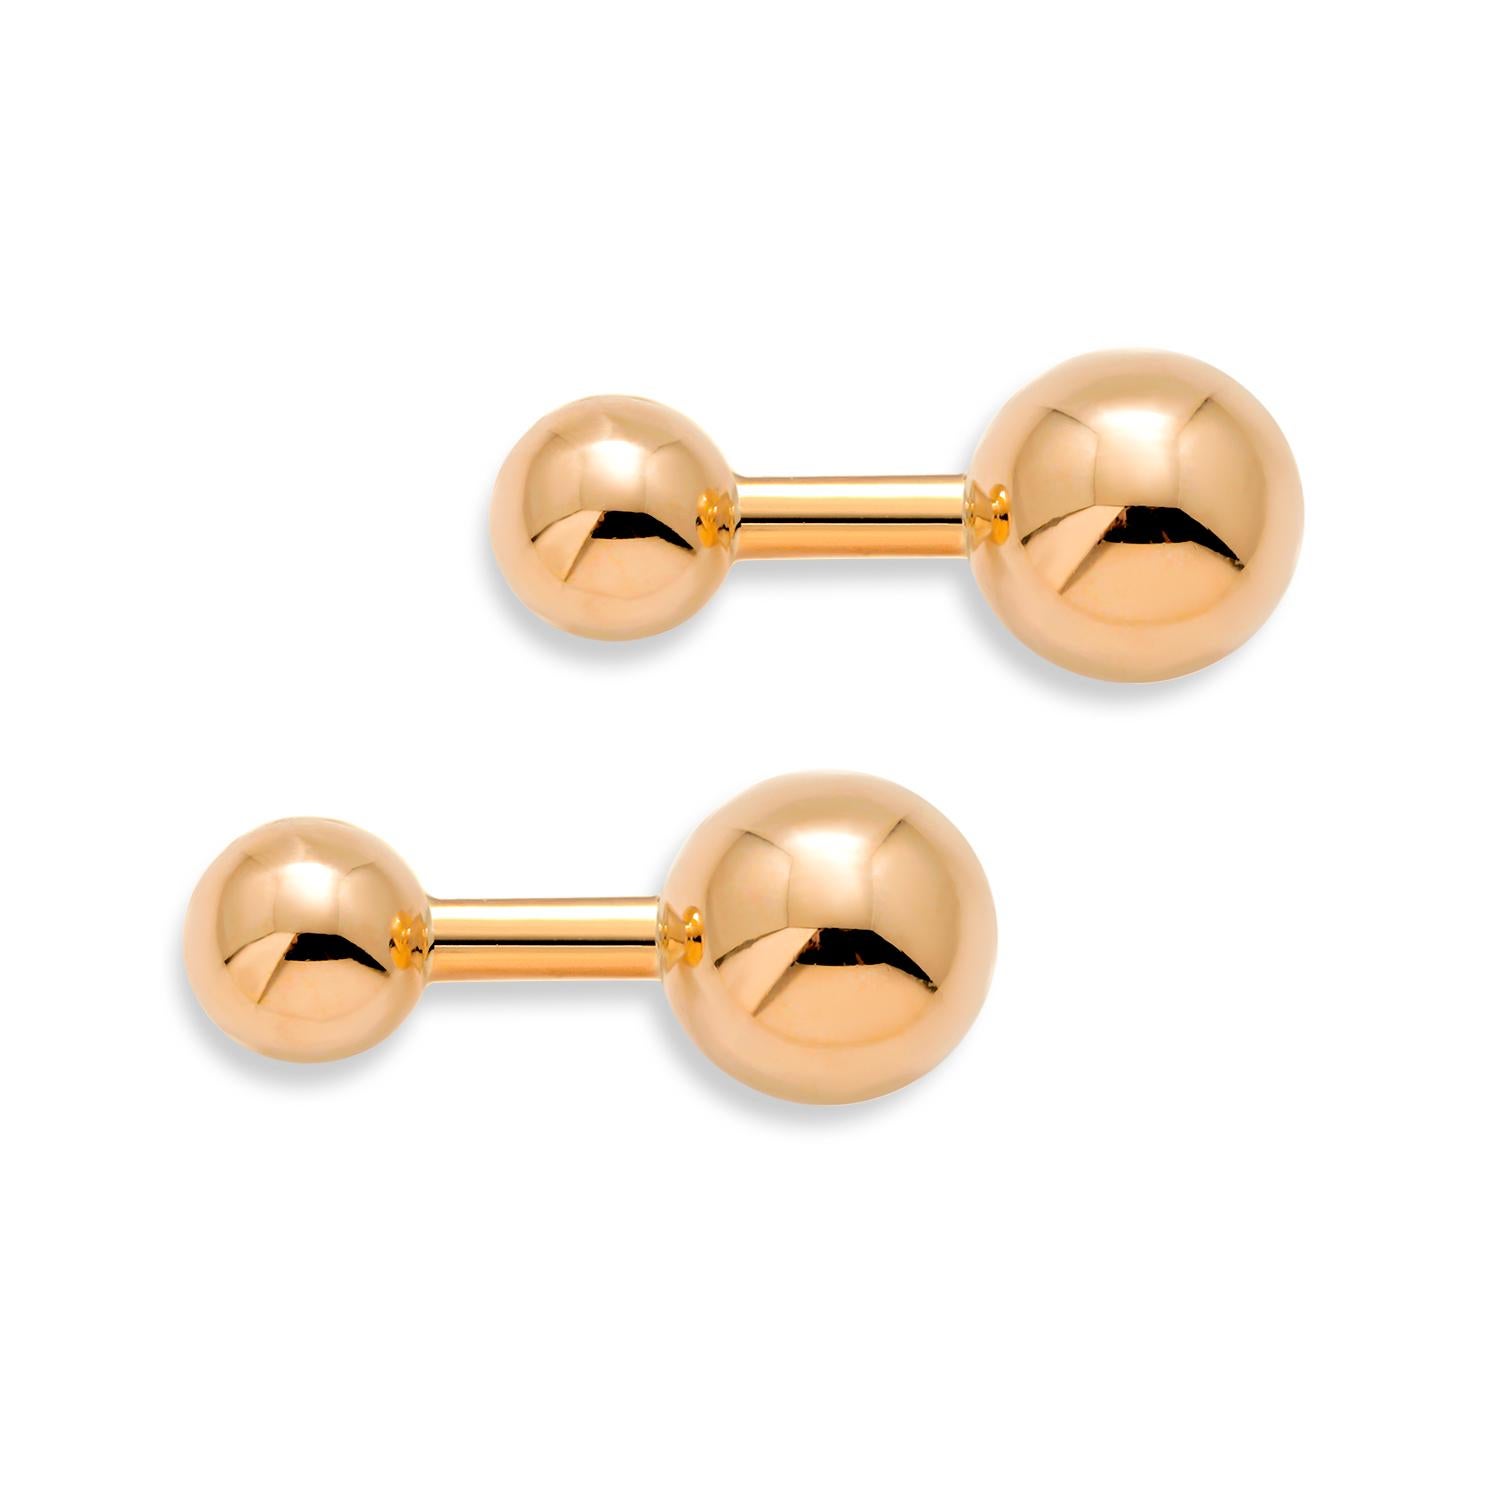 Tiffany and Co Solid Yellow Gold Ball Cufflinks 1.10 Inch Long 1